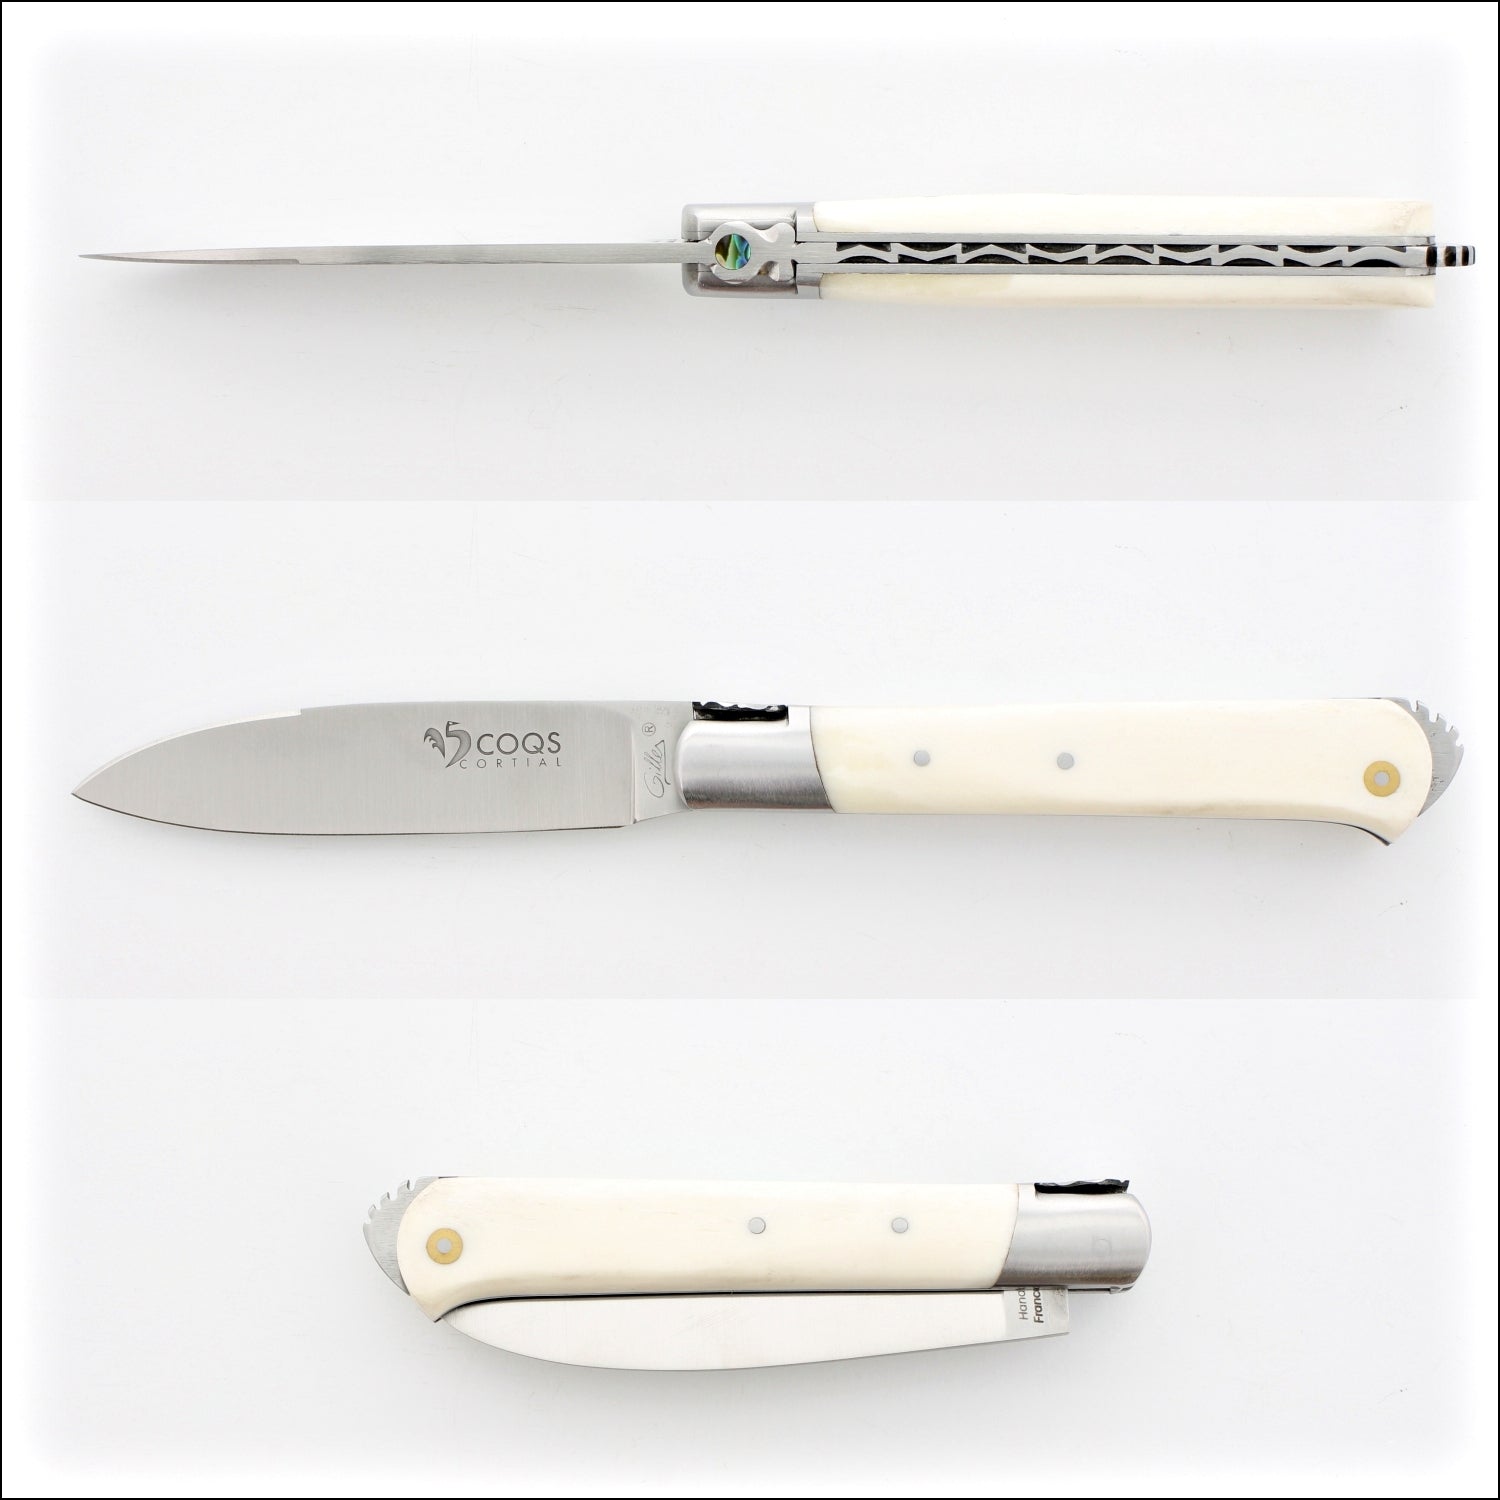 5 Coqs Pocket Knife - Cattle Bone and Mother of Pearl Inlay